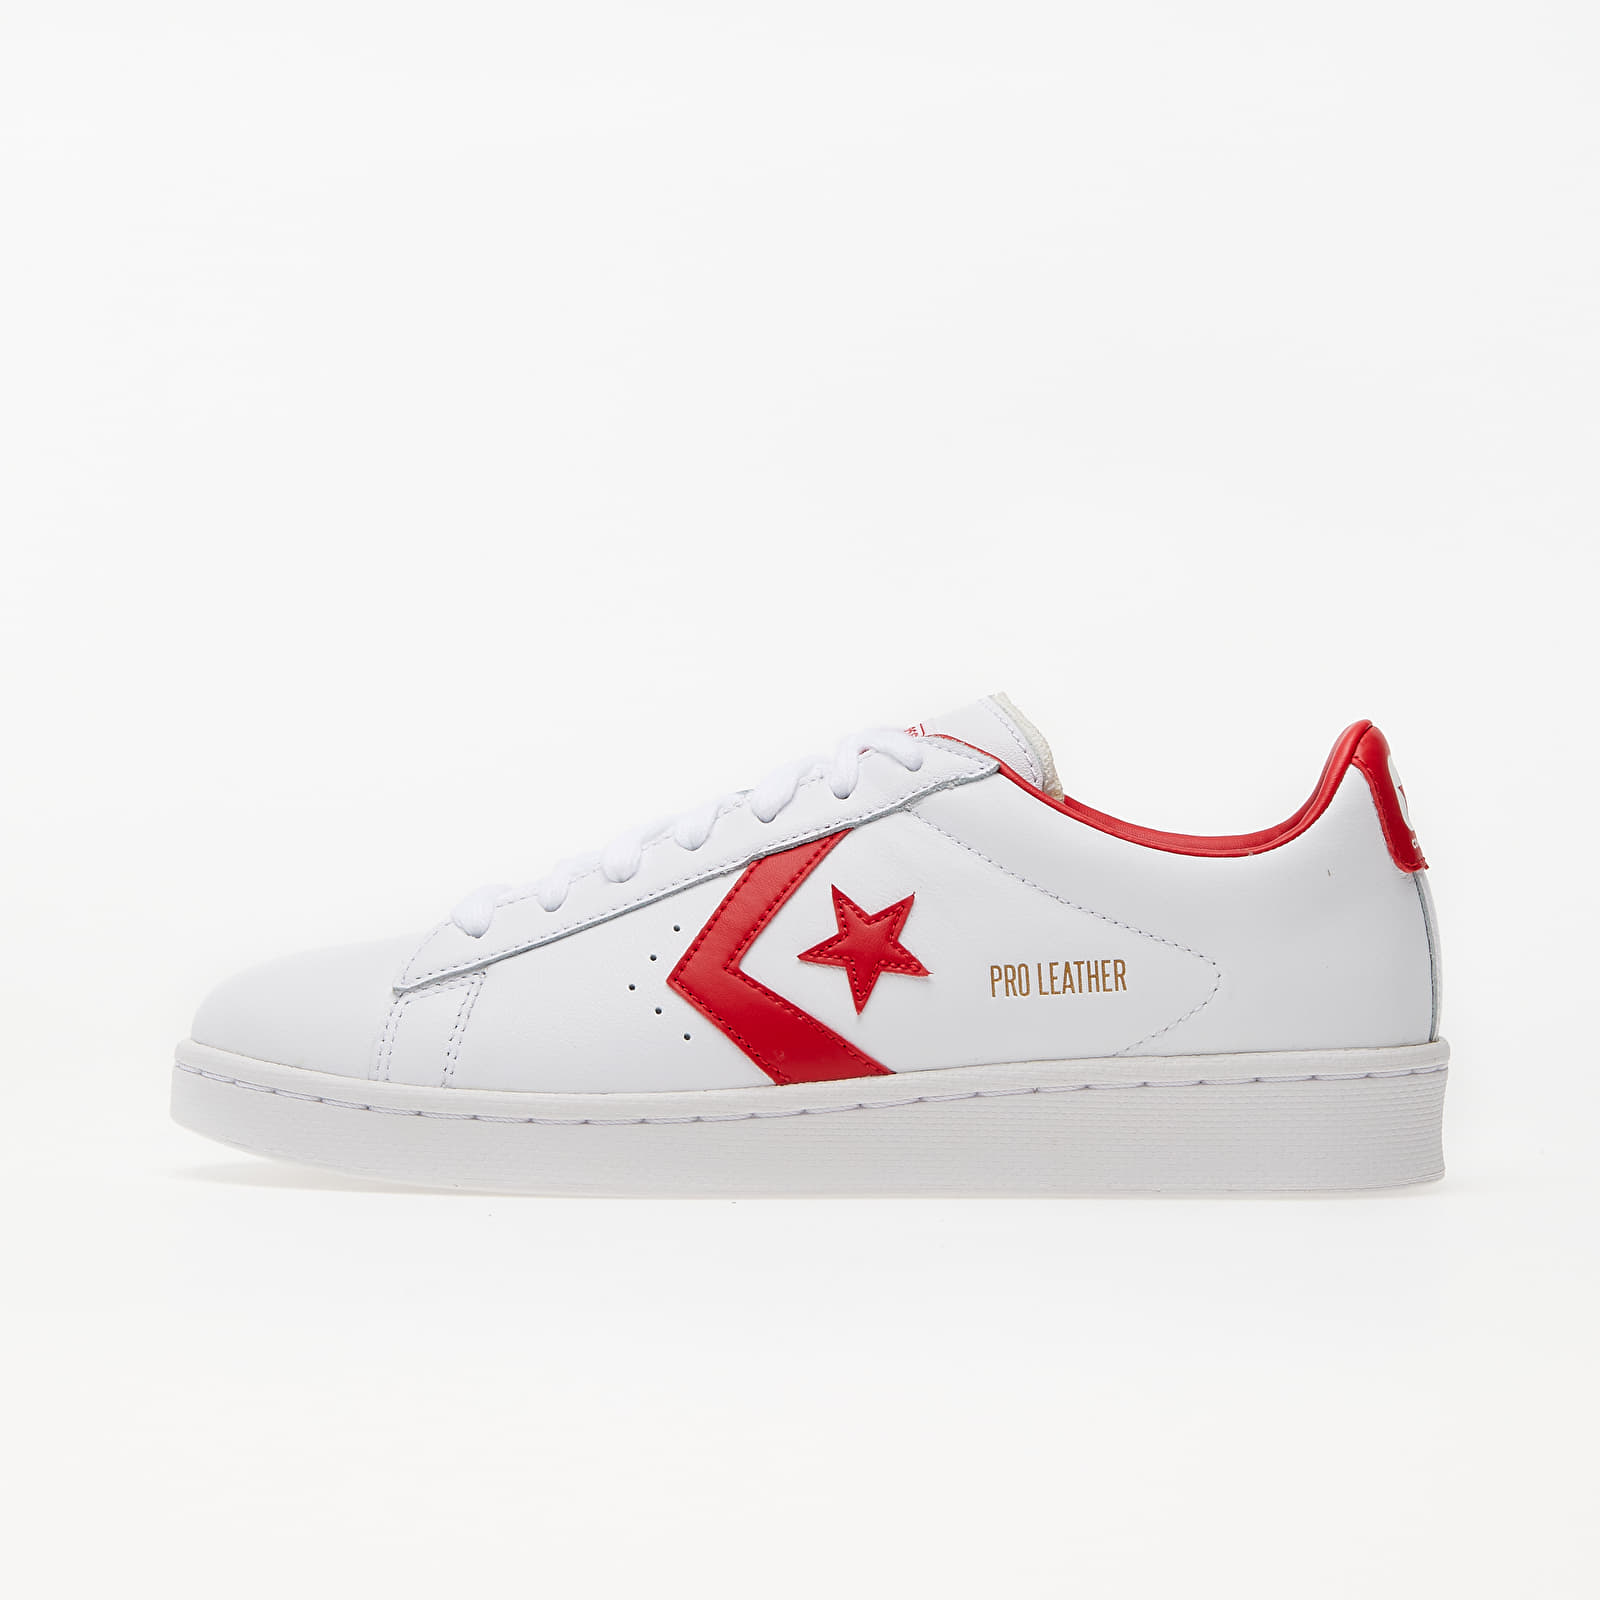 Chaussures et baskets homme Converse Pro Leather Gold Standard White/ University Red